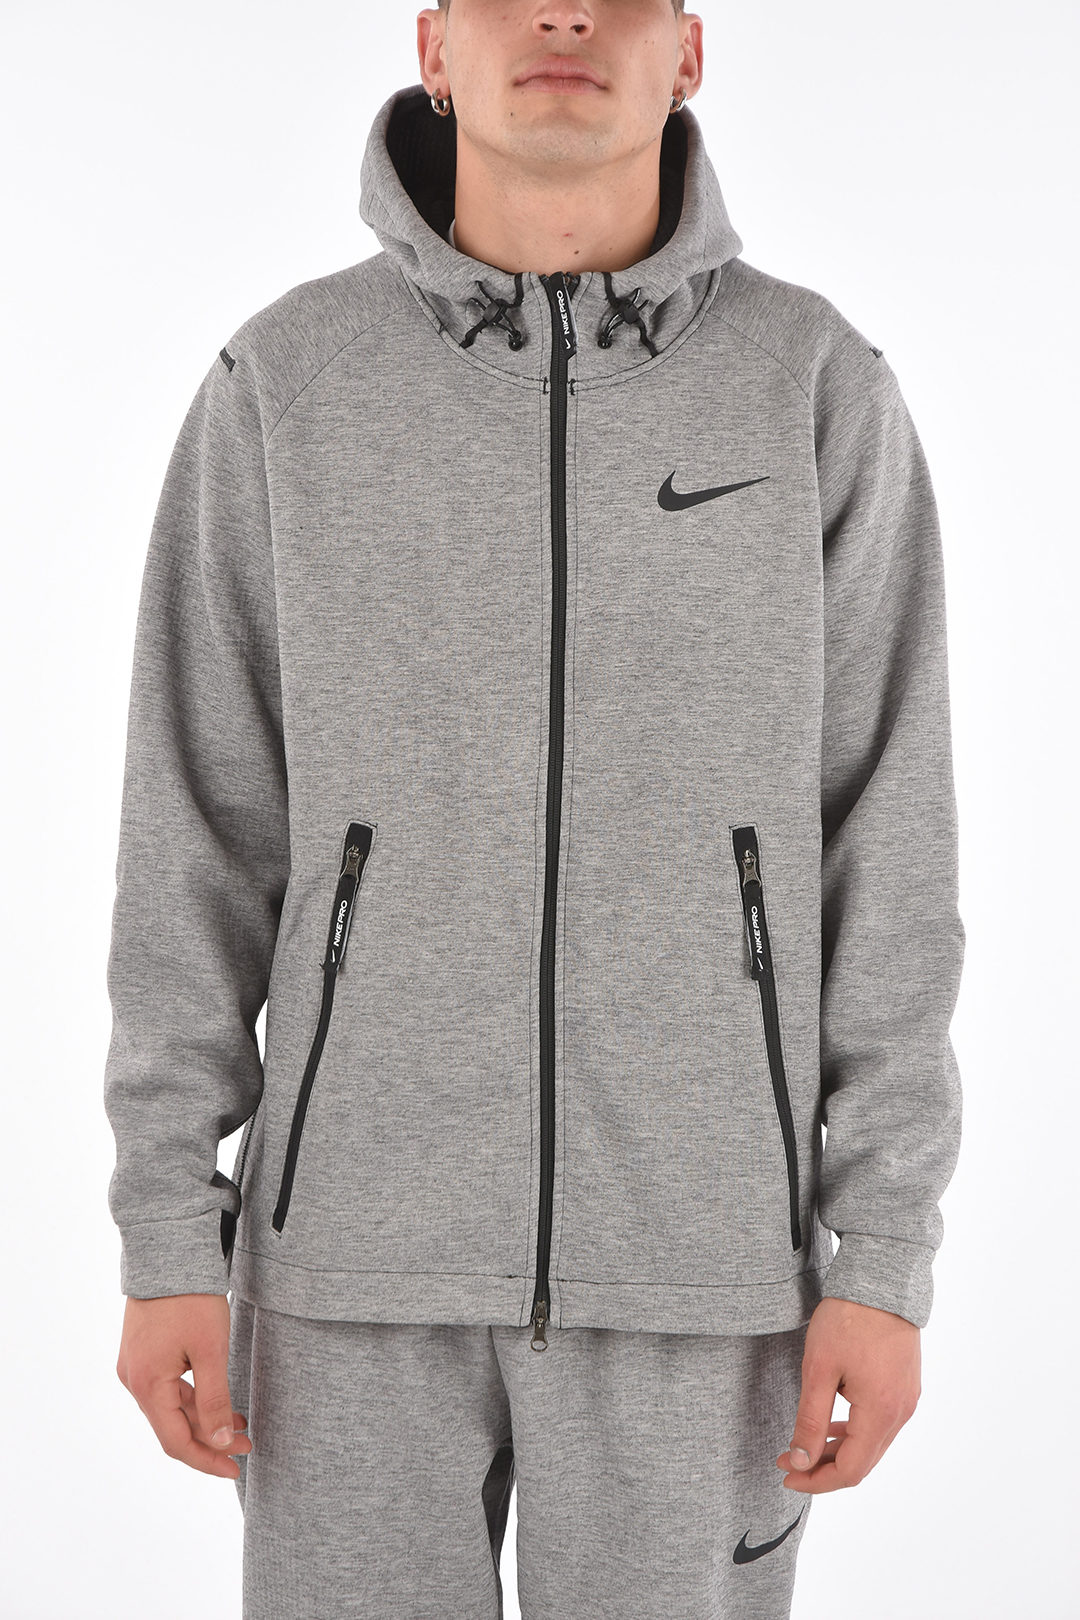 Eligibility self Inn nike therma fit hoodie grey Joint selection ...